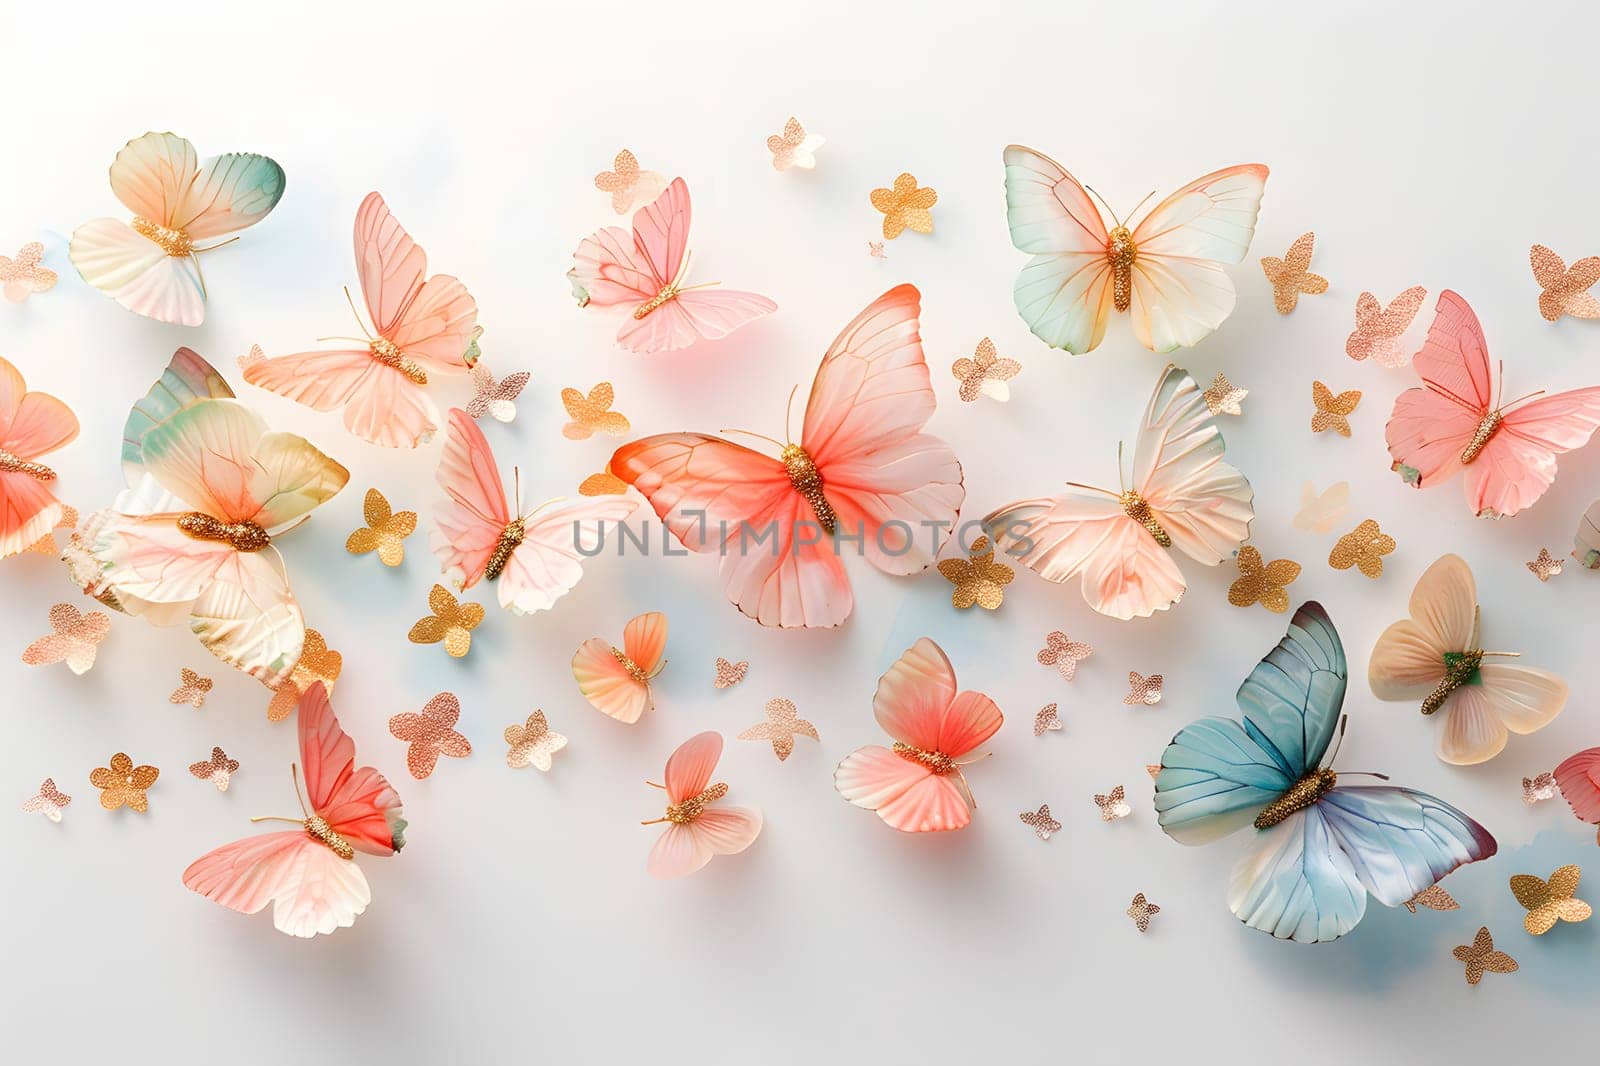 A line of pollinator insects, including butterflies and moths, are fluttering gracefully against a white background. Their pink wings contrast beautifully with the blossoms and petals around them